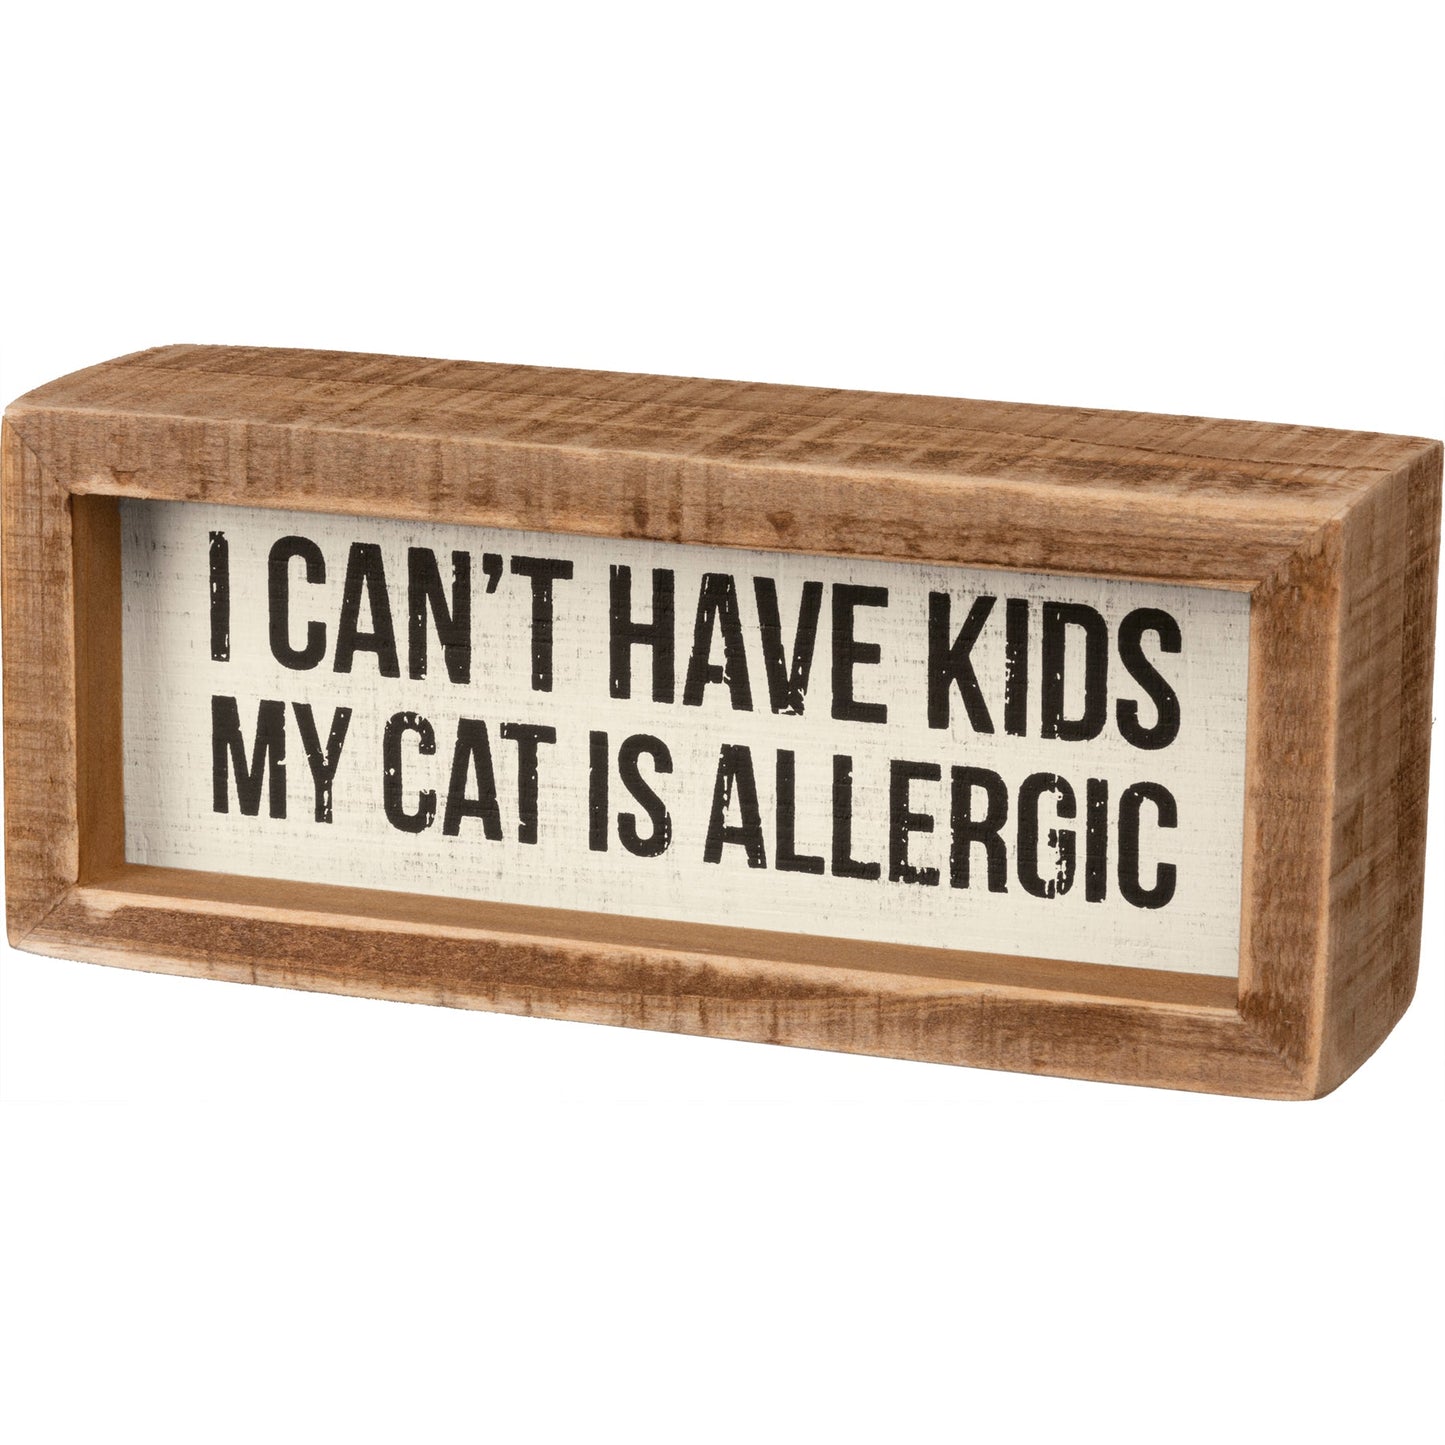 I Can't Have Kids - My Cat Is Allergic Inset Wooden Box Sign | Funny Home Door Decor | 6" x 2.50"